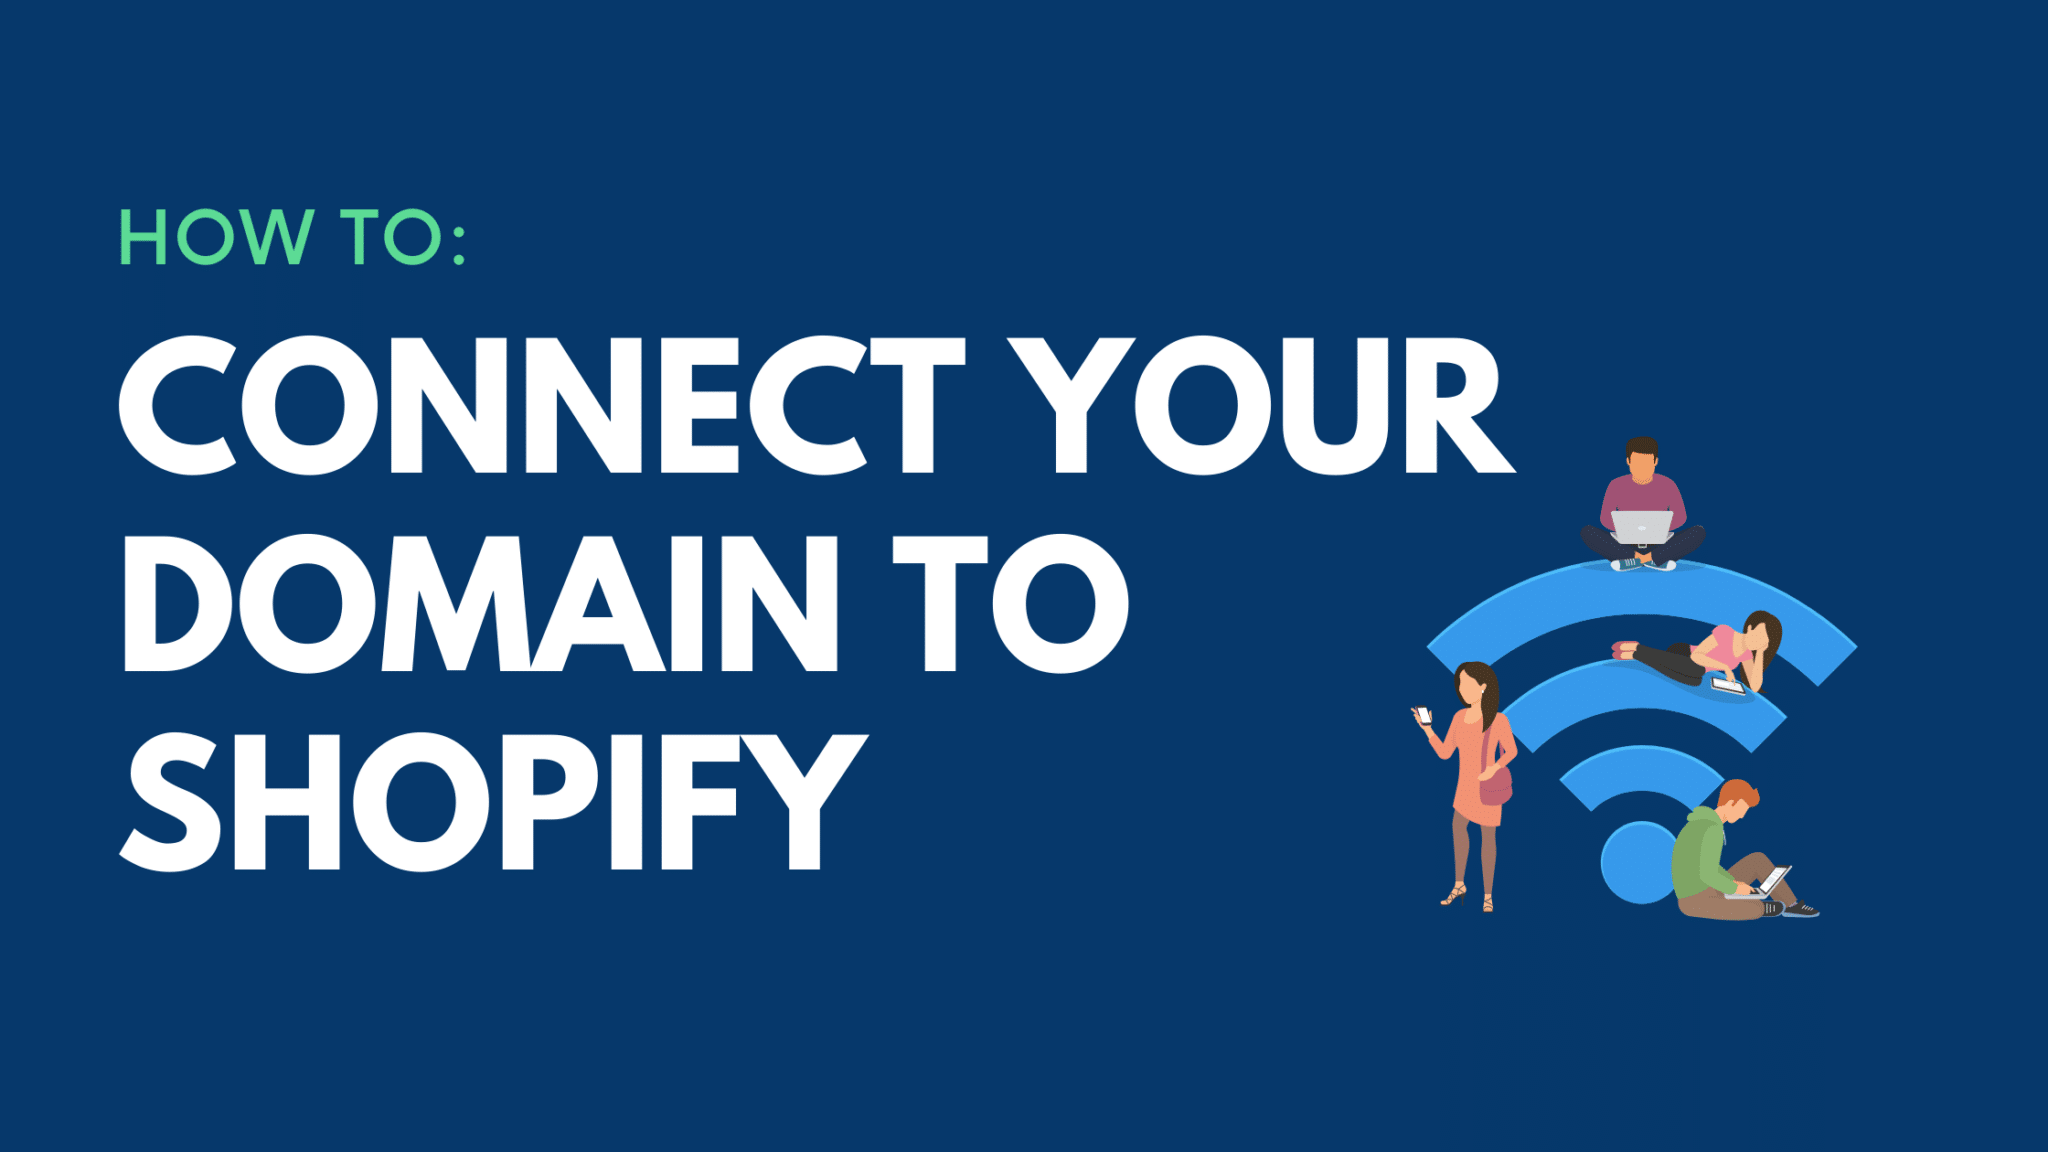 The image shows instructions on how to connect a domain to a Shopify account.